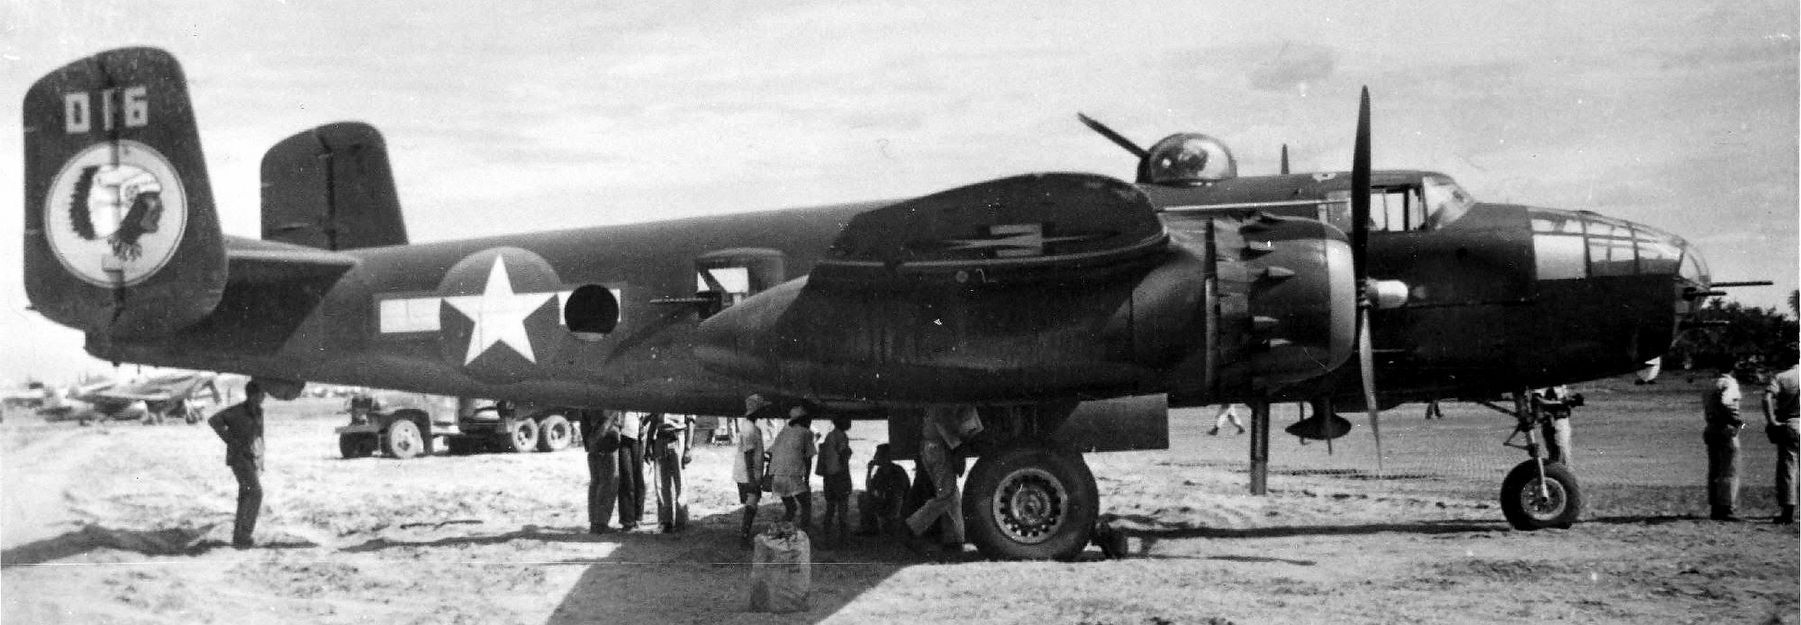 B-25J s/n 43-36016 of the 501st Bomb Squadron, 345th Bomb Group image. Click for full size.